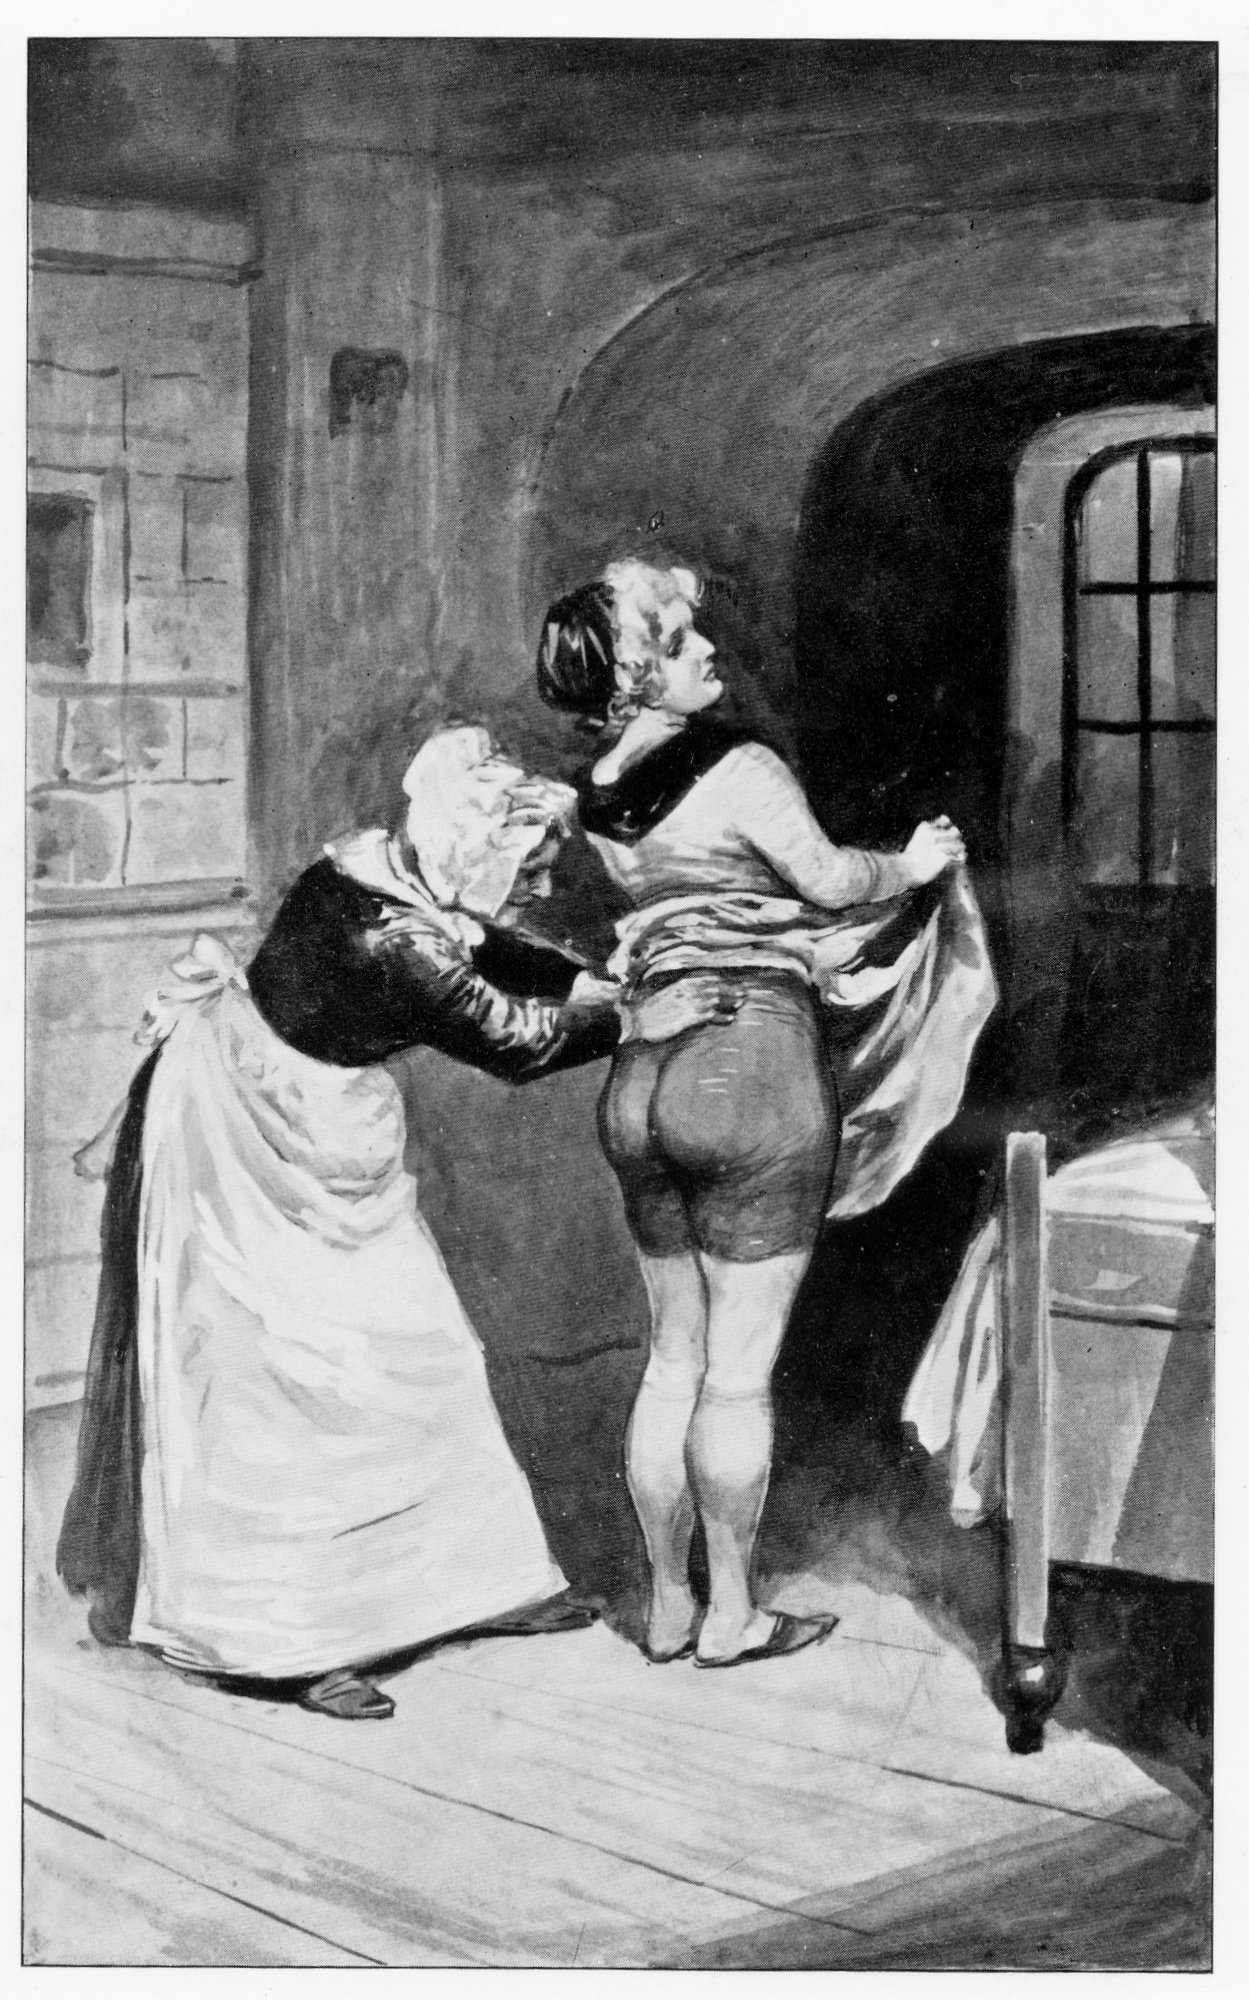 Anonymous, %22Nell in Bridewell%22 Spanking Illustrations_10.jpg